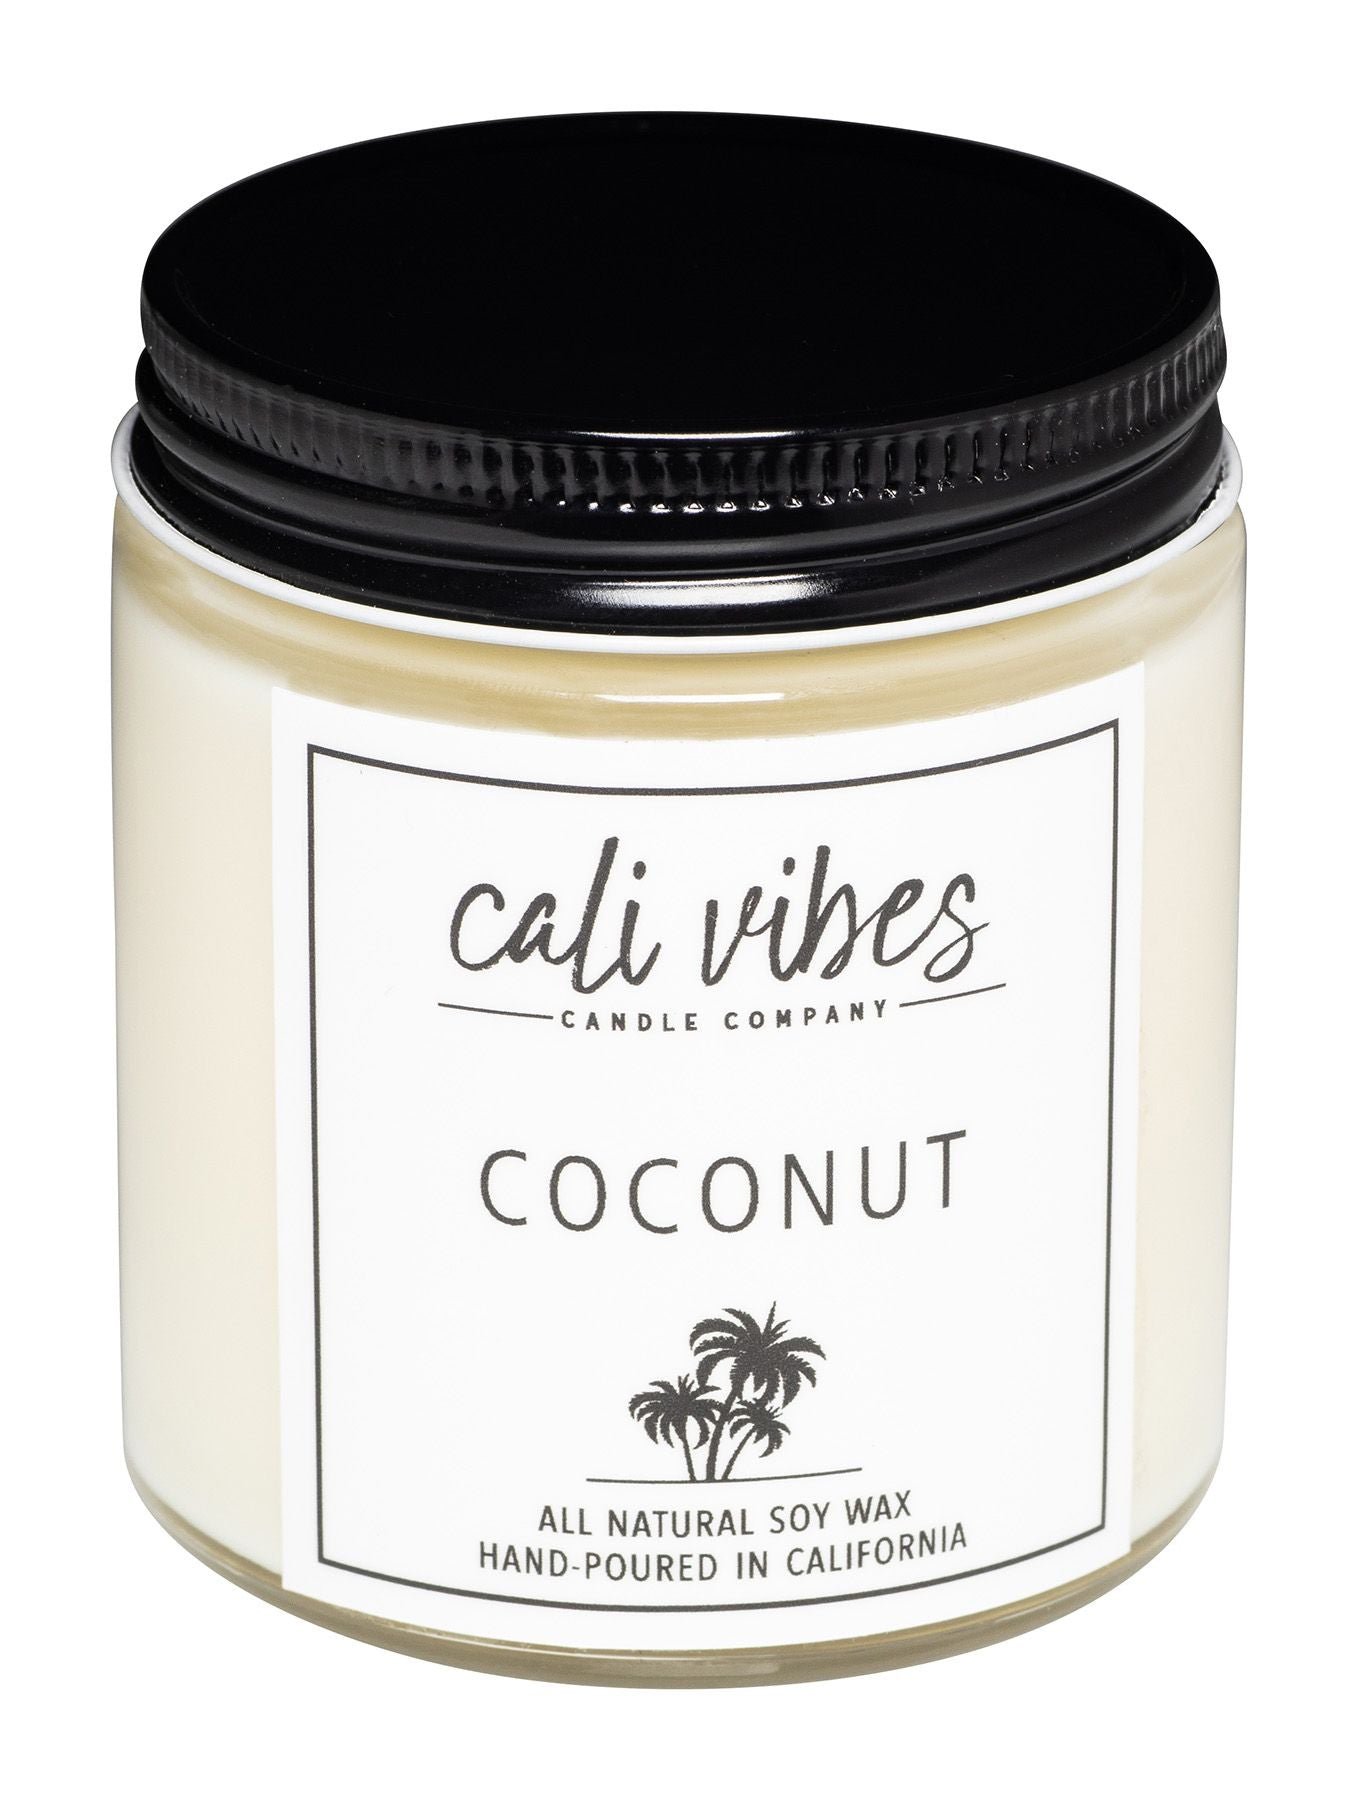 About our coconut soy wax – Fire Within Candle Co